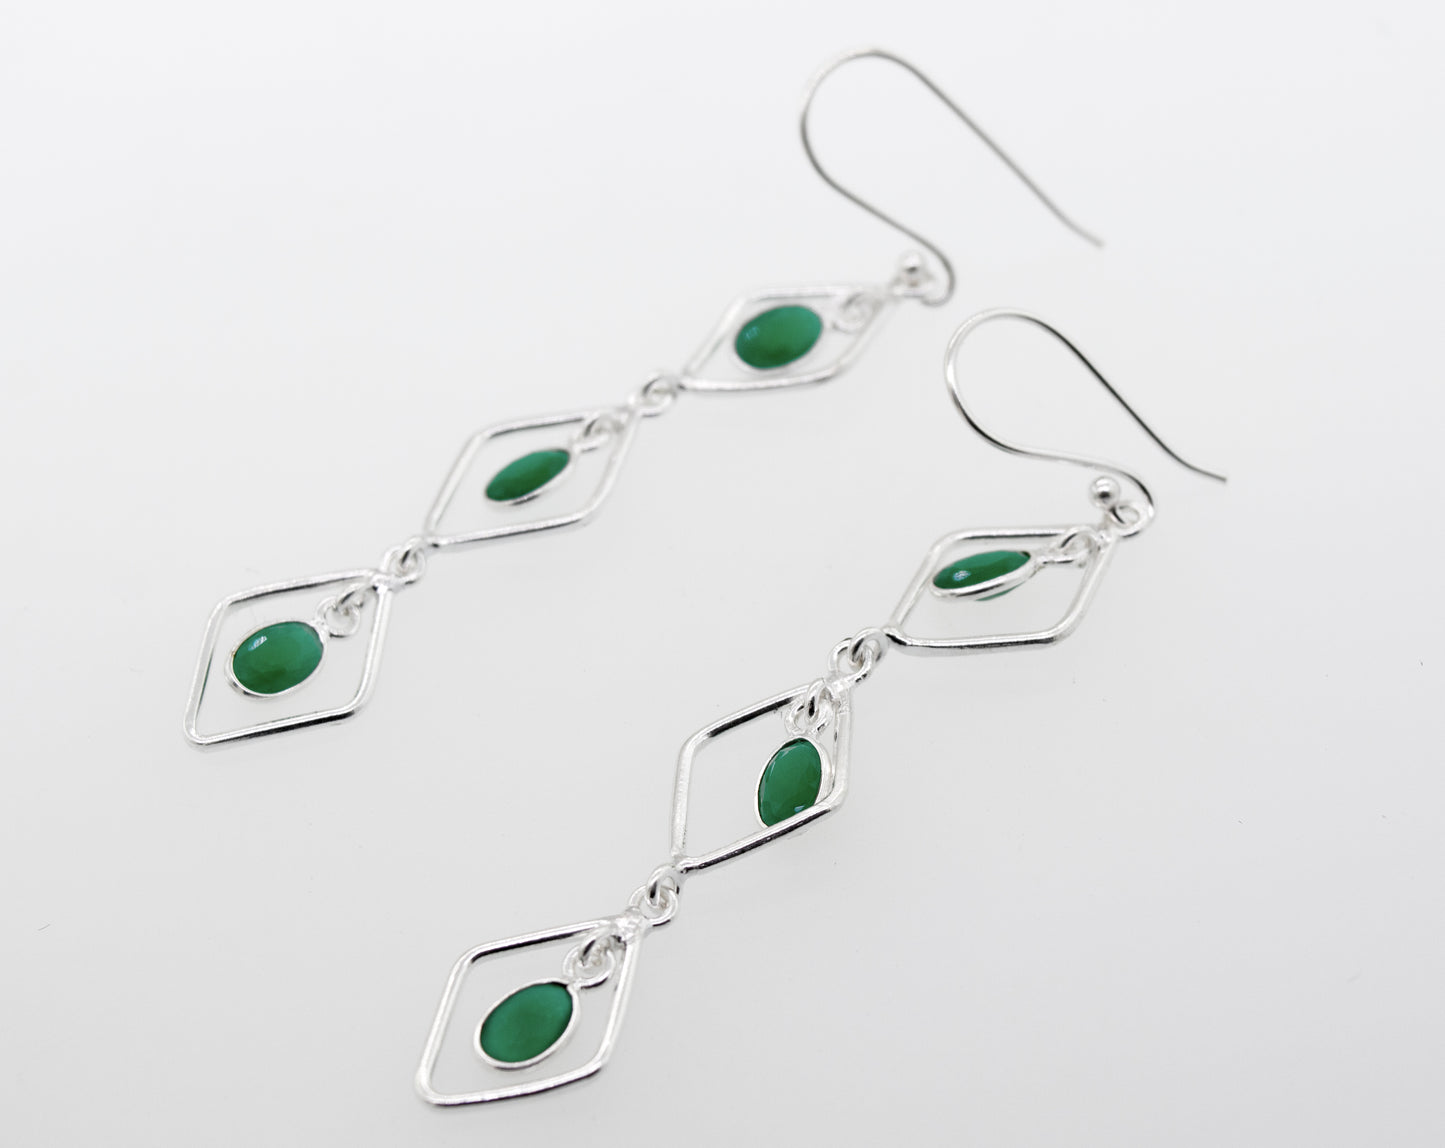 Super Silver's Wire Diamond Earrings with Emerald, measuring 2.5 inches long, are crafted in sterling silver.